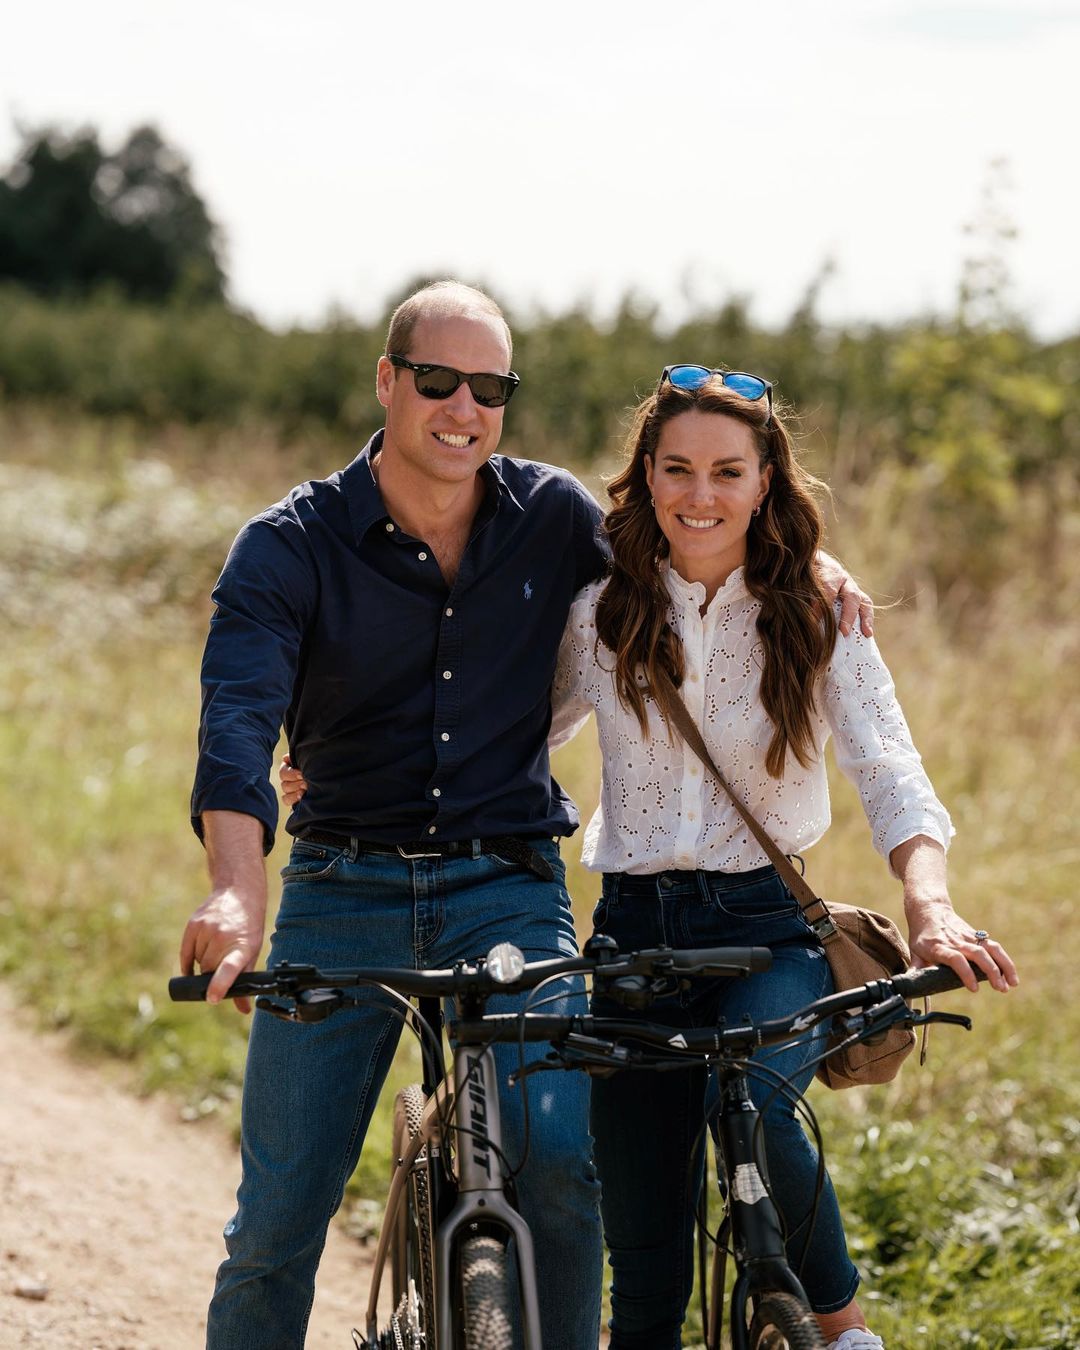 Prince William & Kate probably won’t release a photo for their 13th anniversary